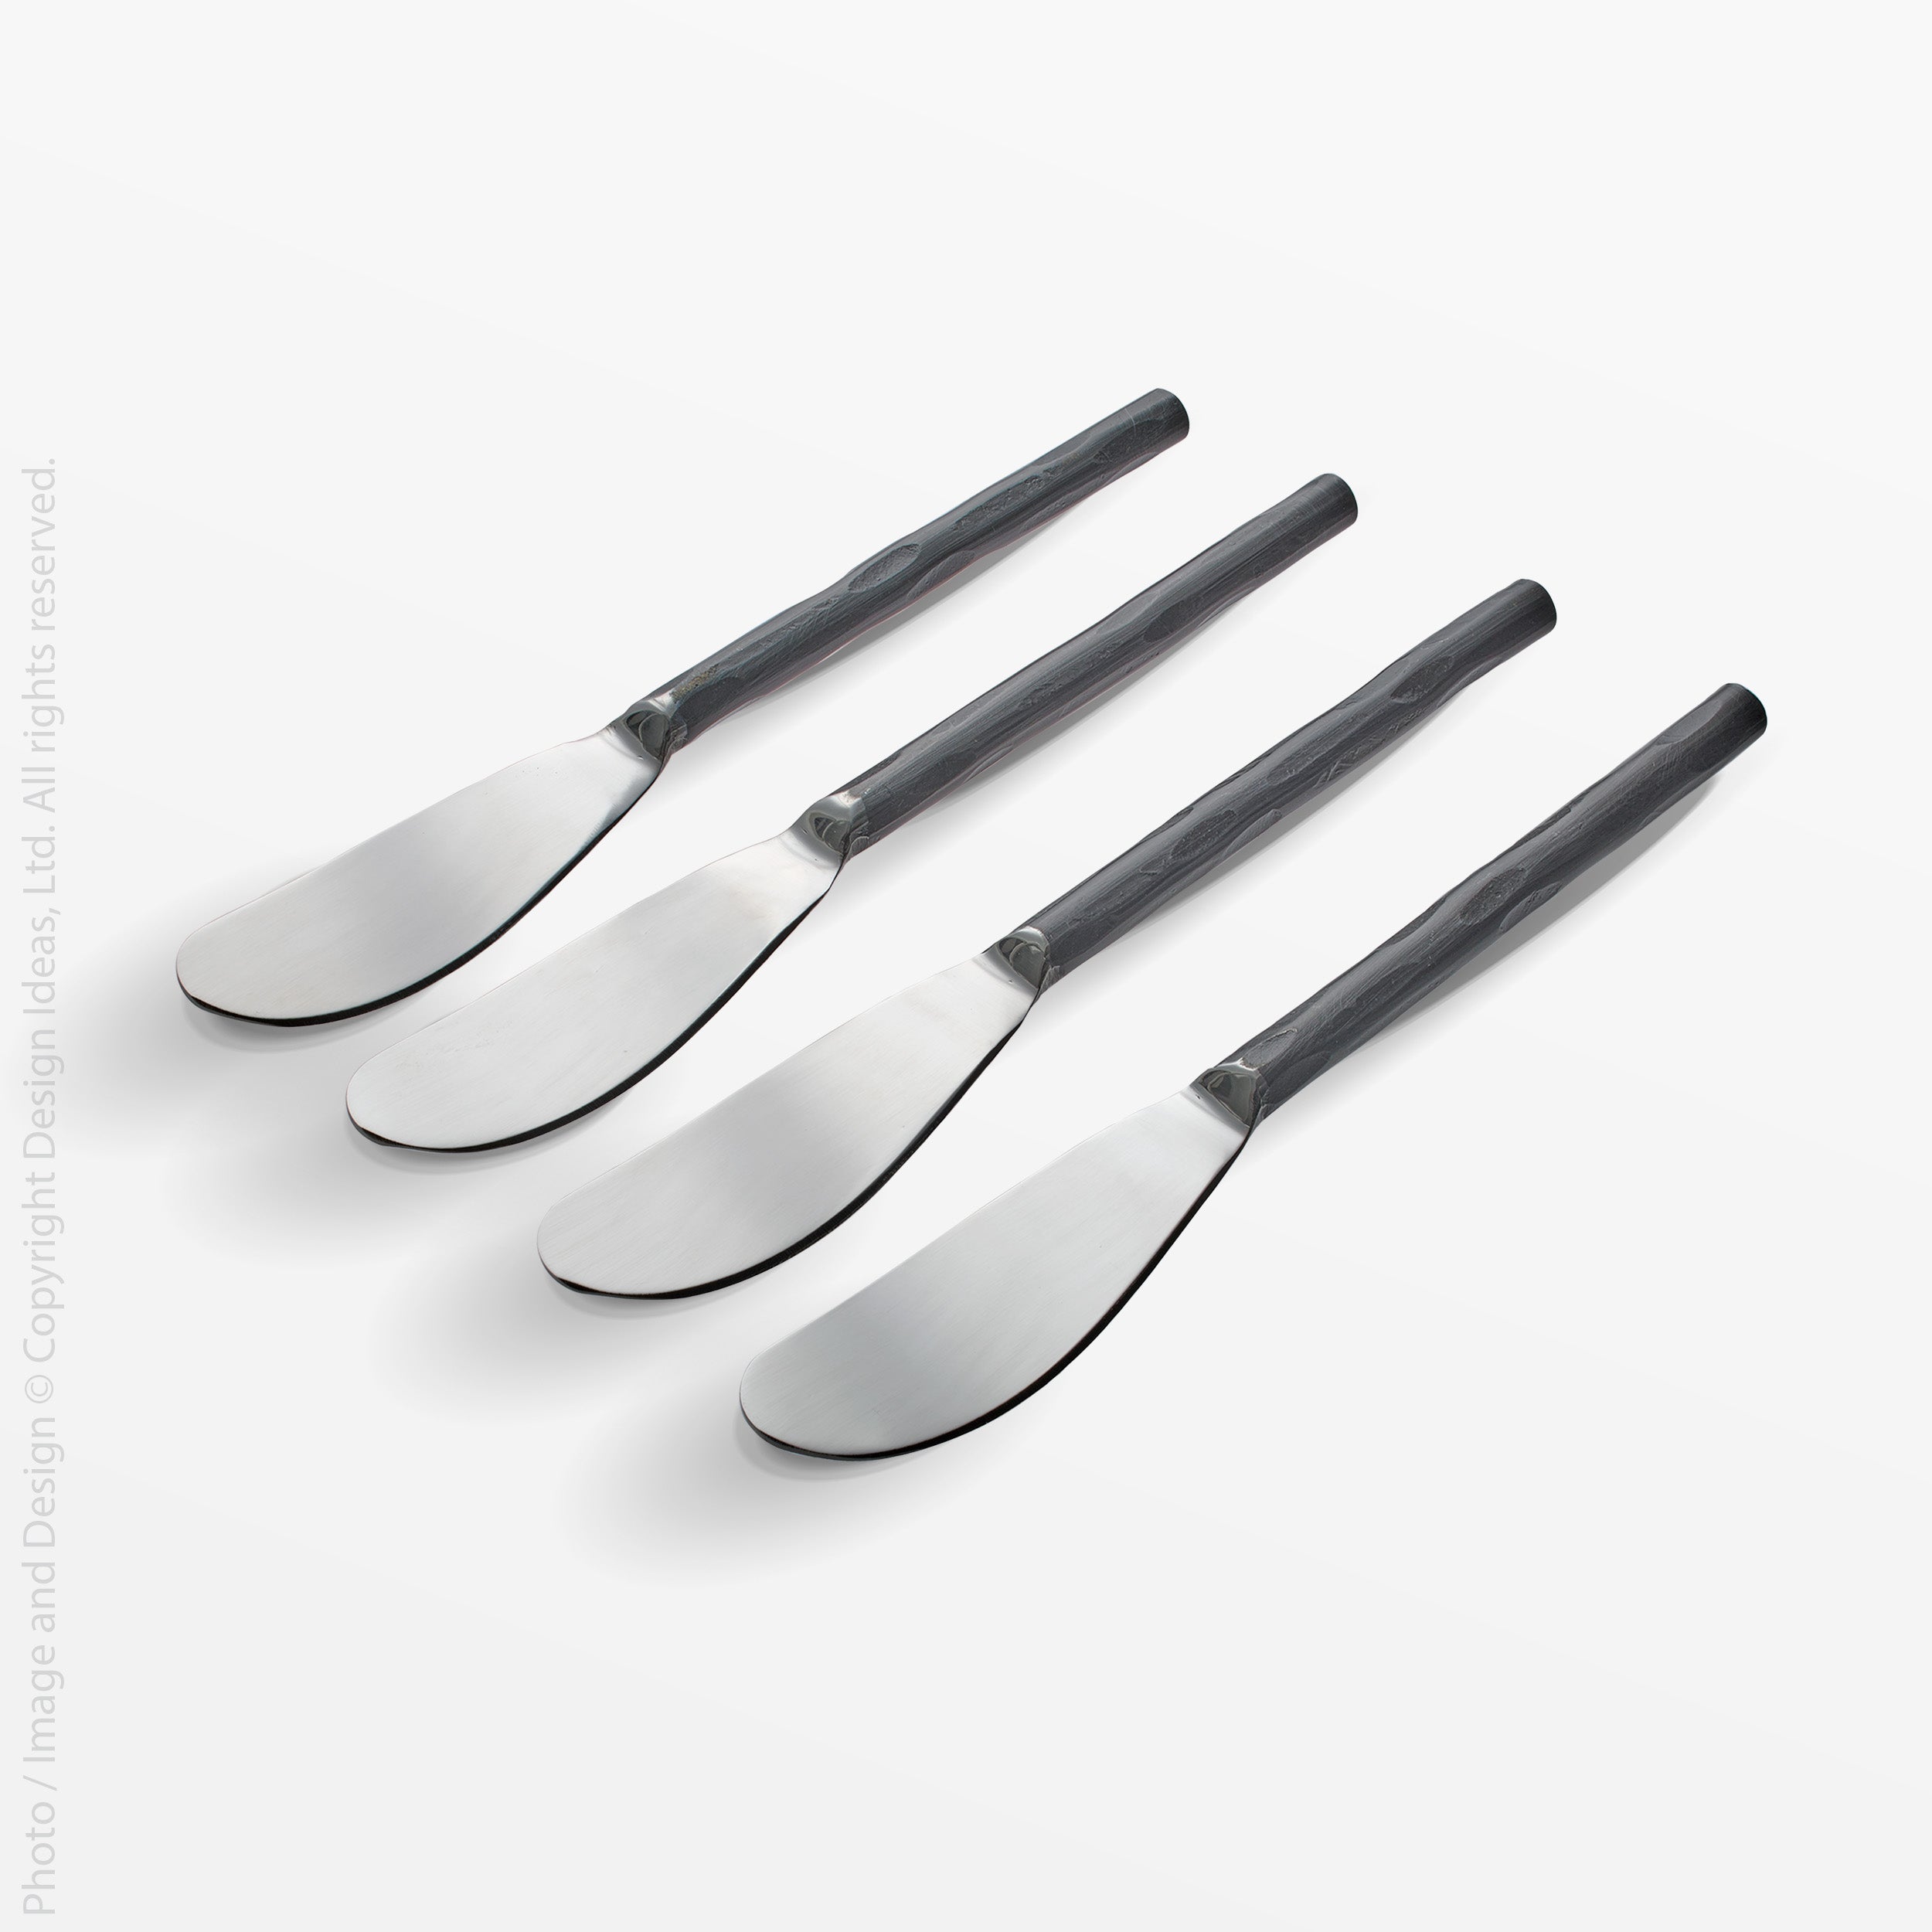 Tomini™ Hand Forged Stainless Steel Spreaders (Set of 4)